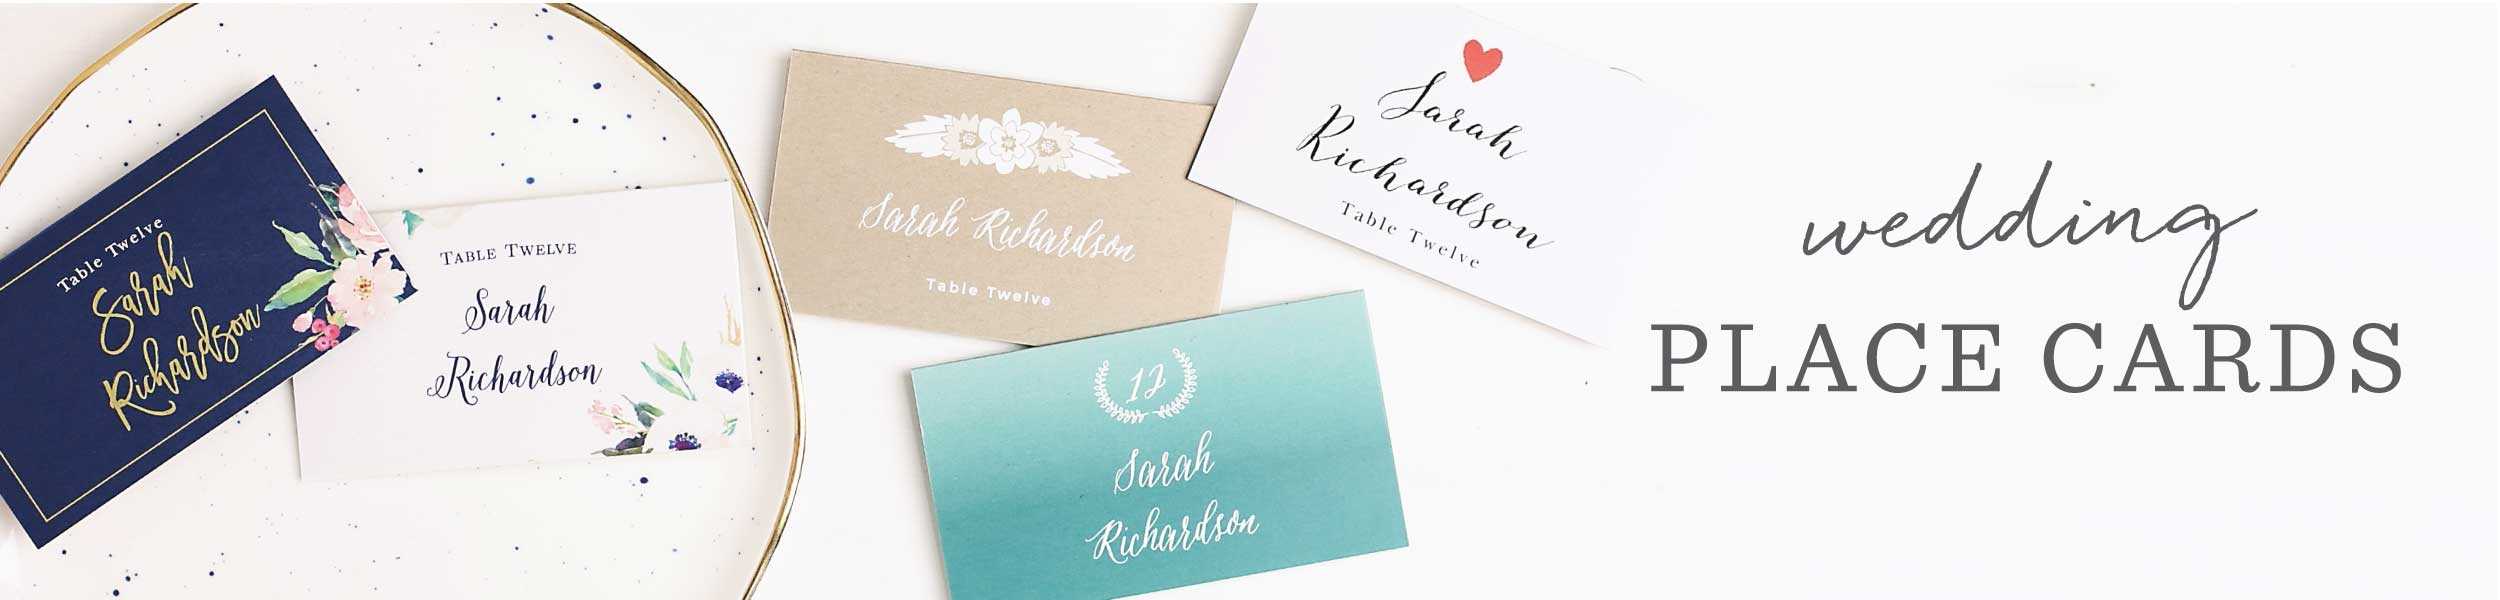 034 Wedding Place Cards Name Template Marvelous Ideas With Regard To Place Card Setting Template